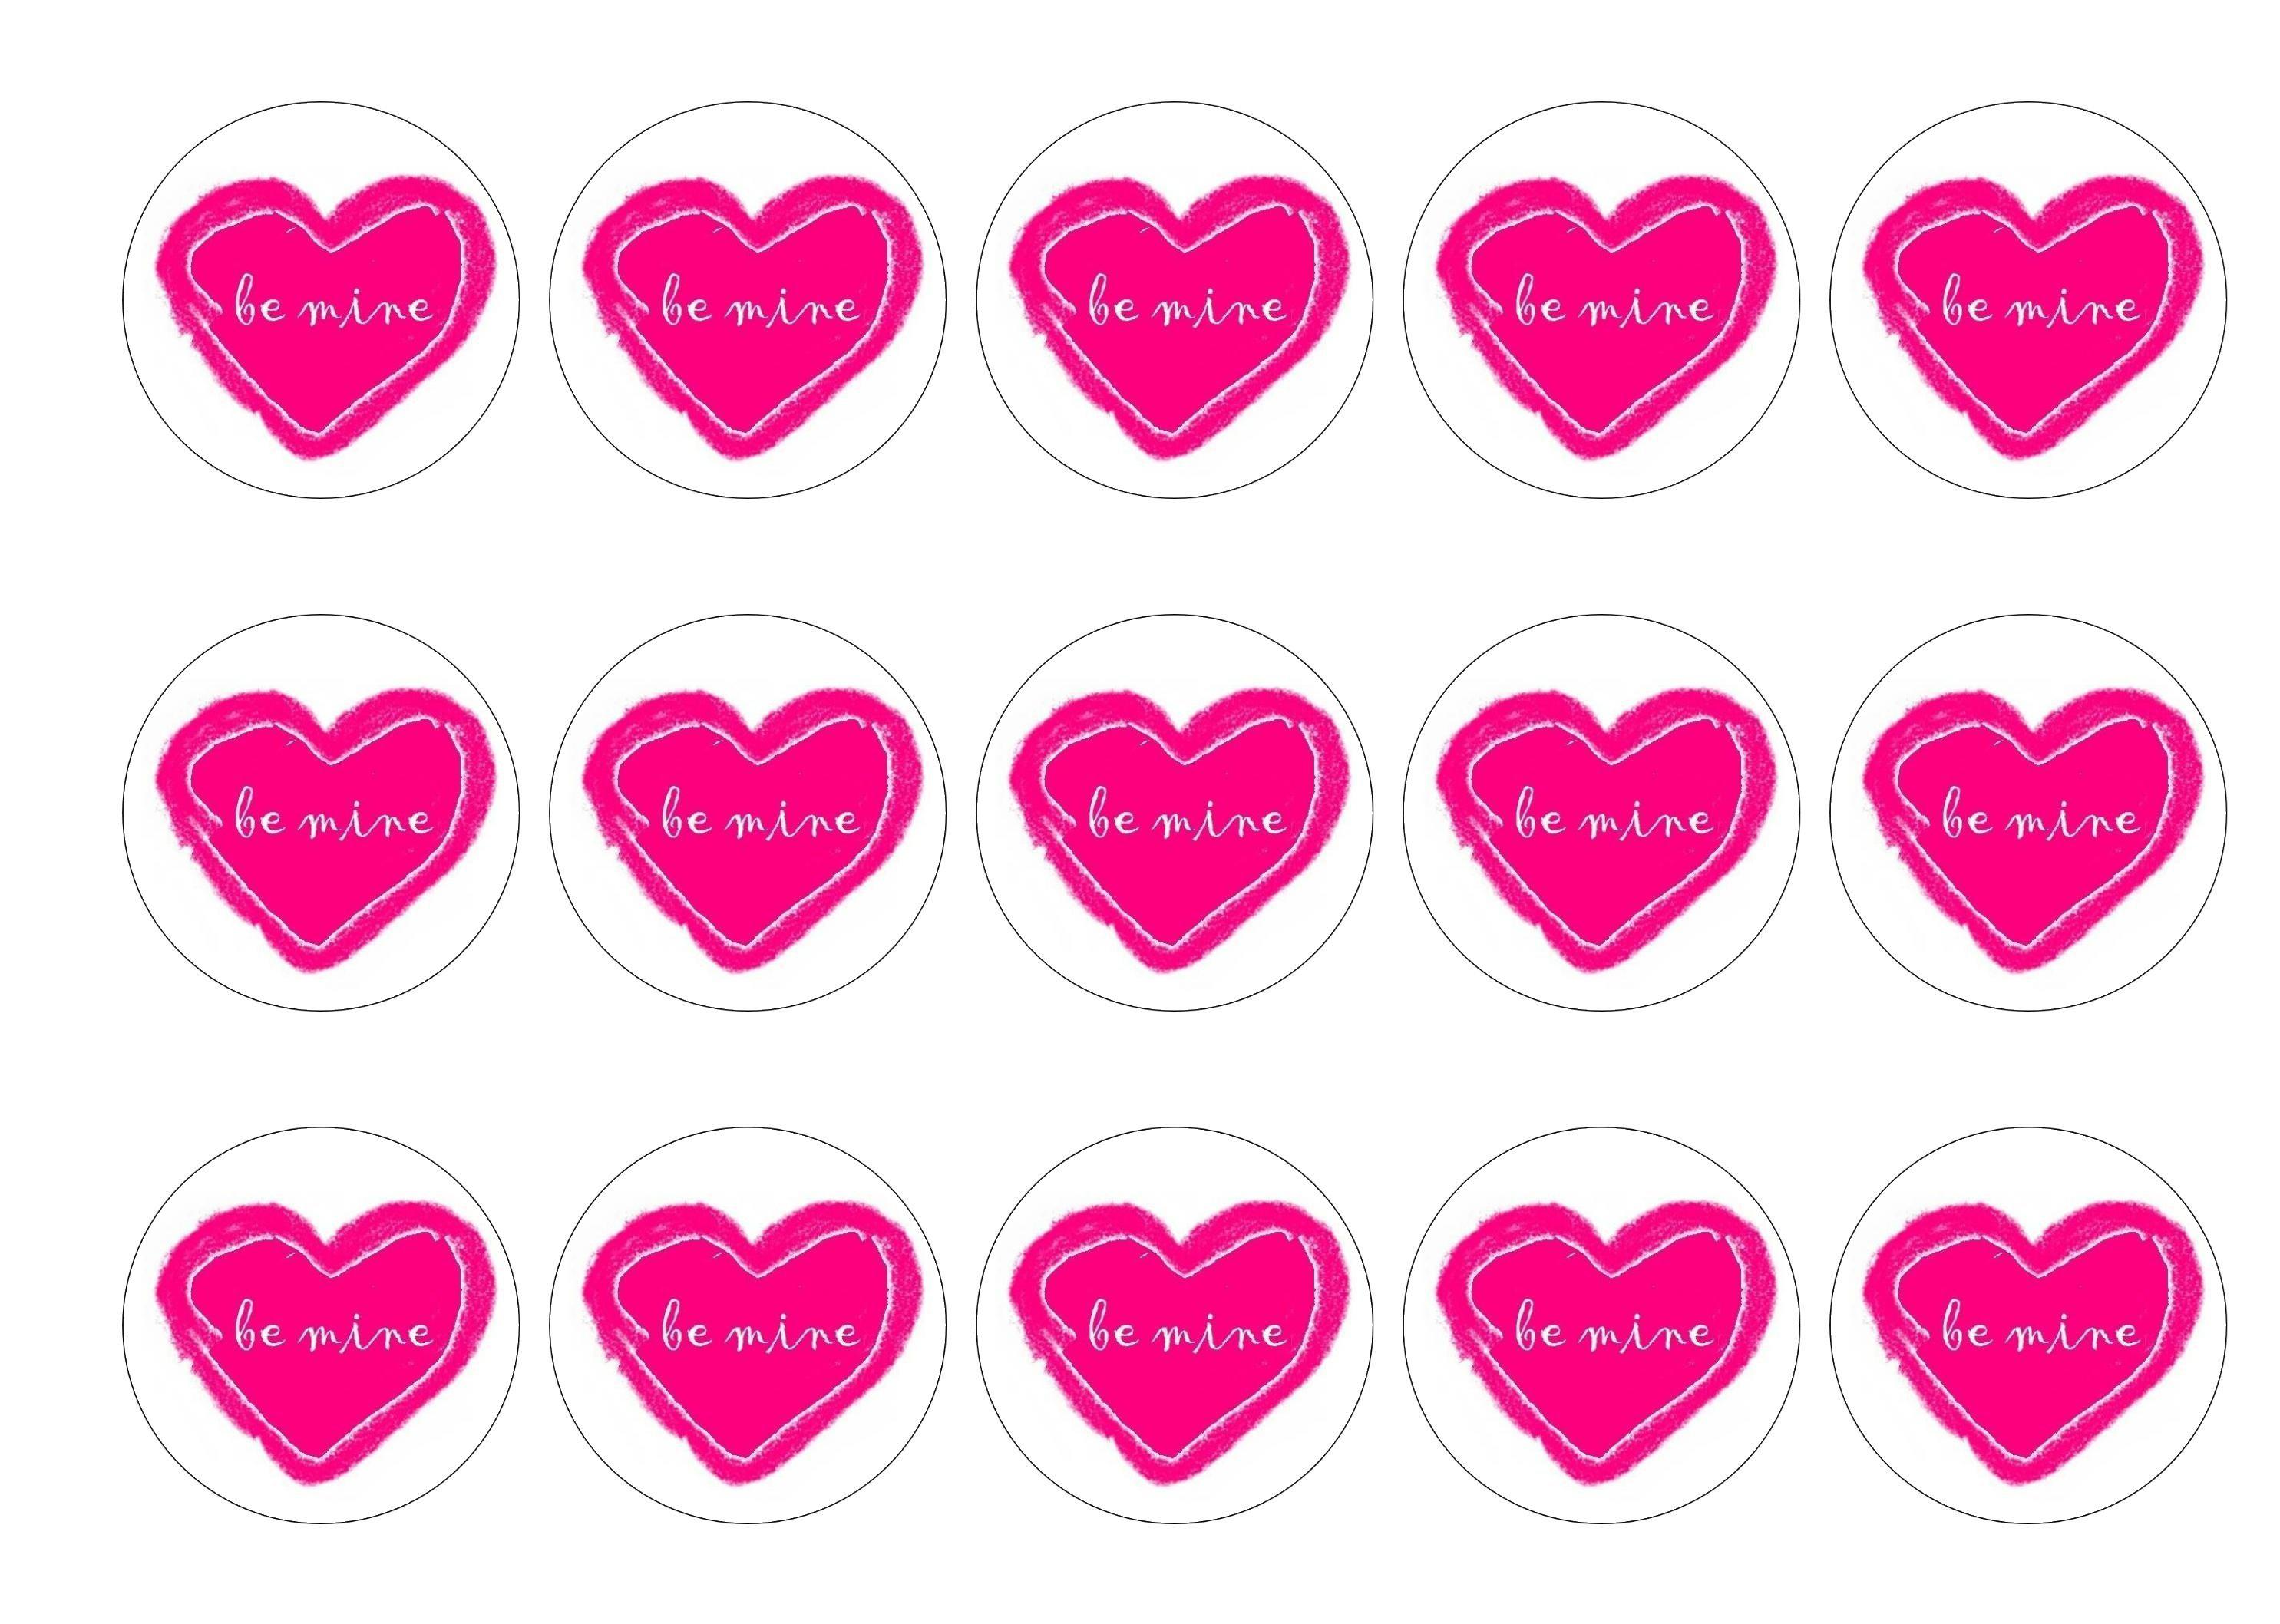 Printed edible cupcake toppers for Valentines Day